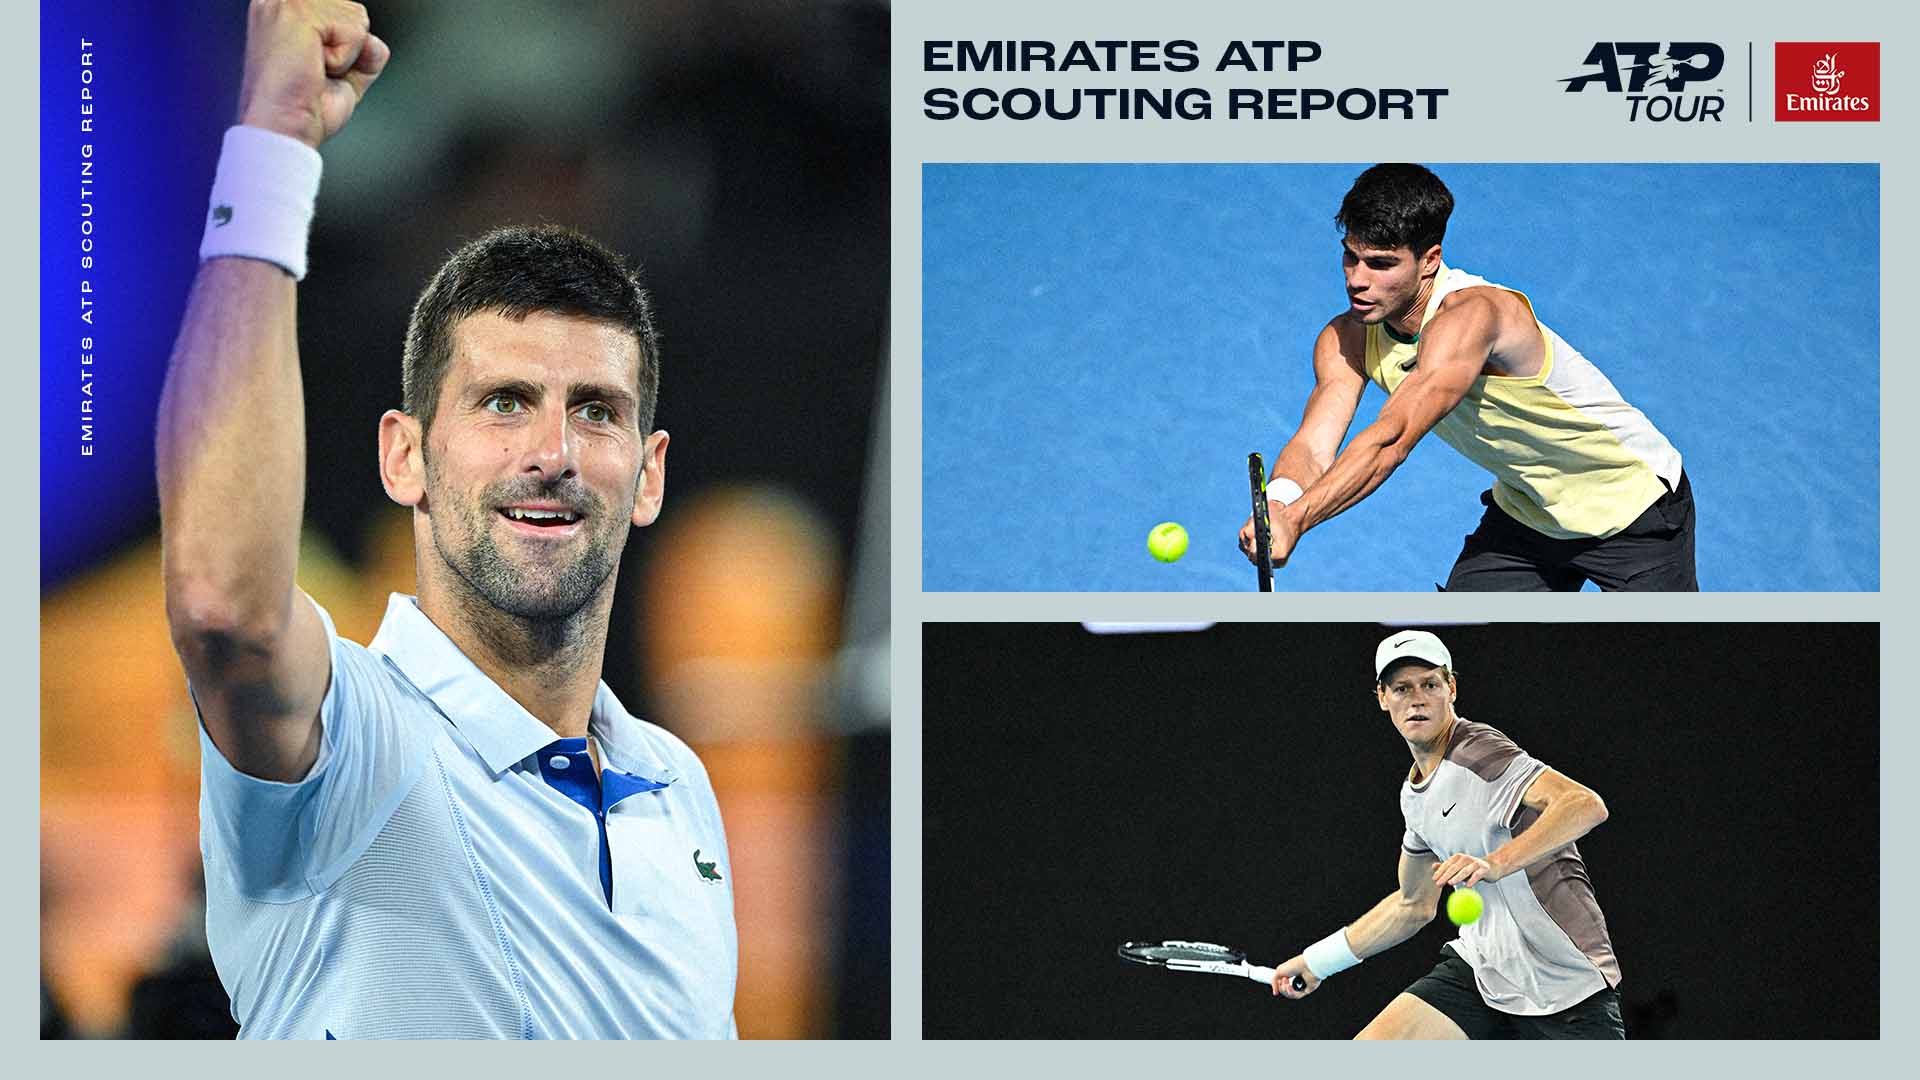 Novak Djokovic, Carlos Alcaraz and Jannik Sinner will compete at the first ATP Masters 1000 of the season in Indian Wells.